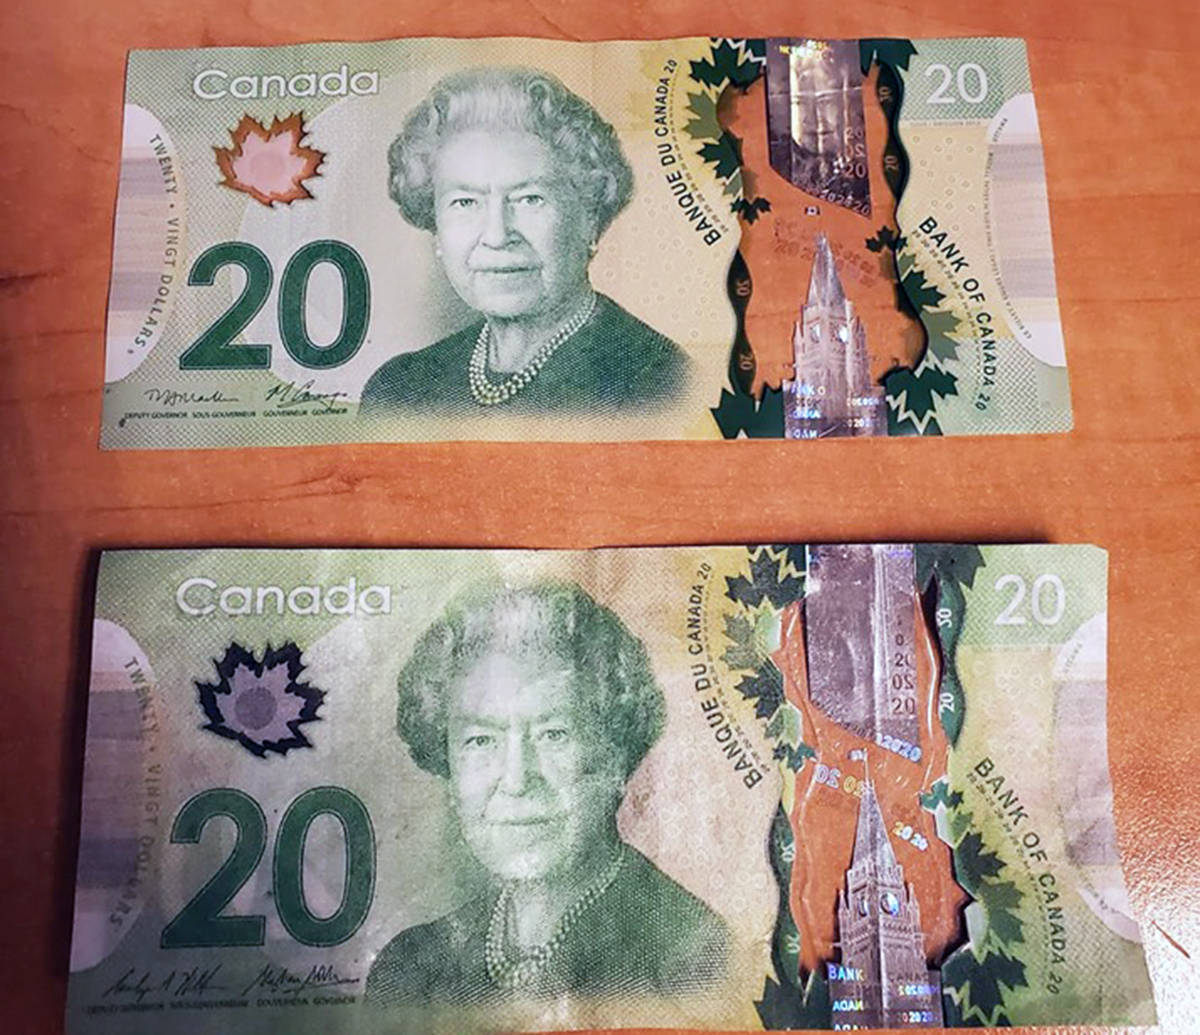 where can i buy fake canadian money?